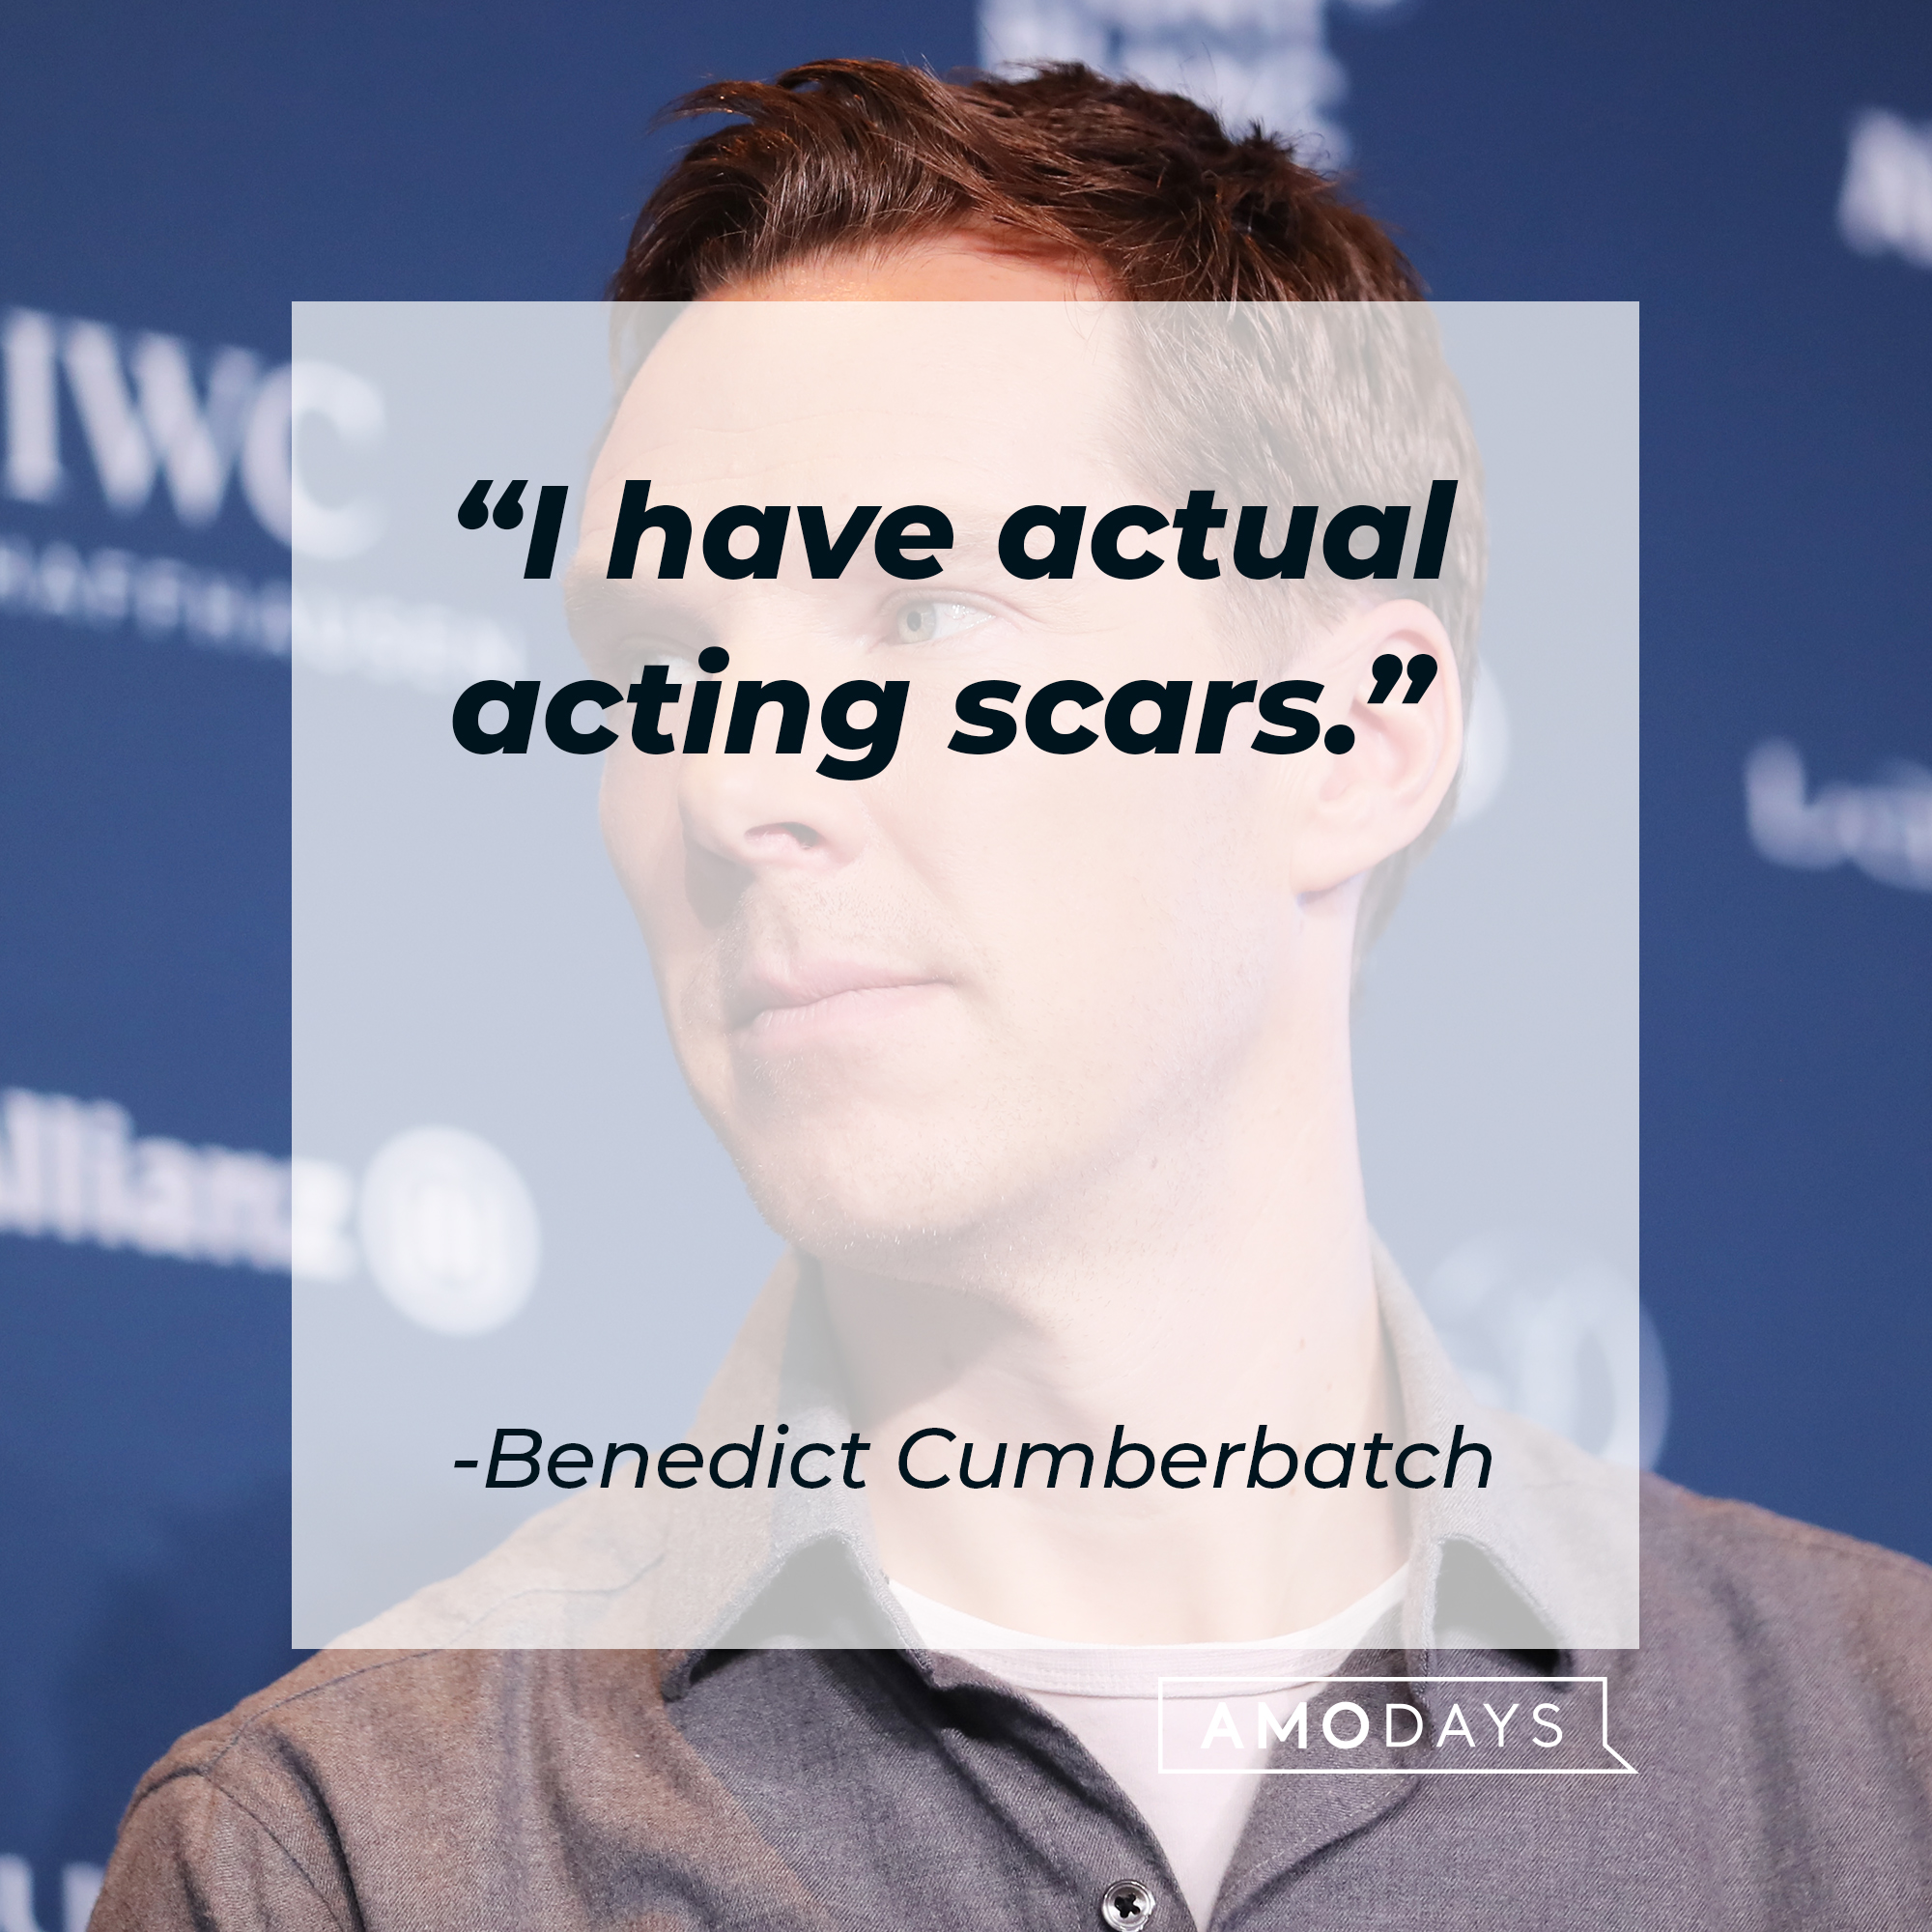 Benedict Cumberbatch, with his quote: “I have actual acting scars.” | Source: Getty Images